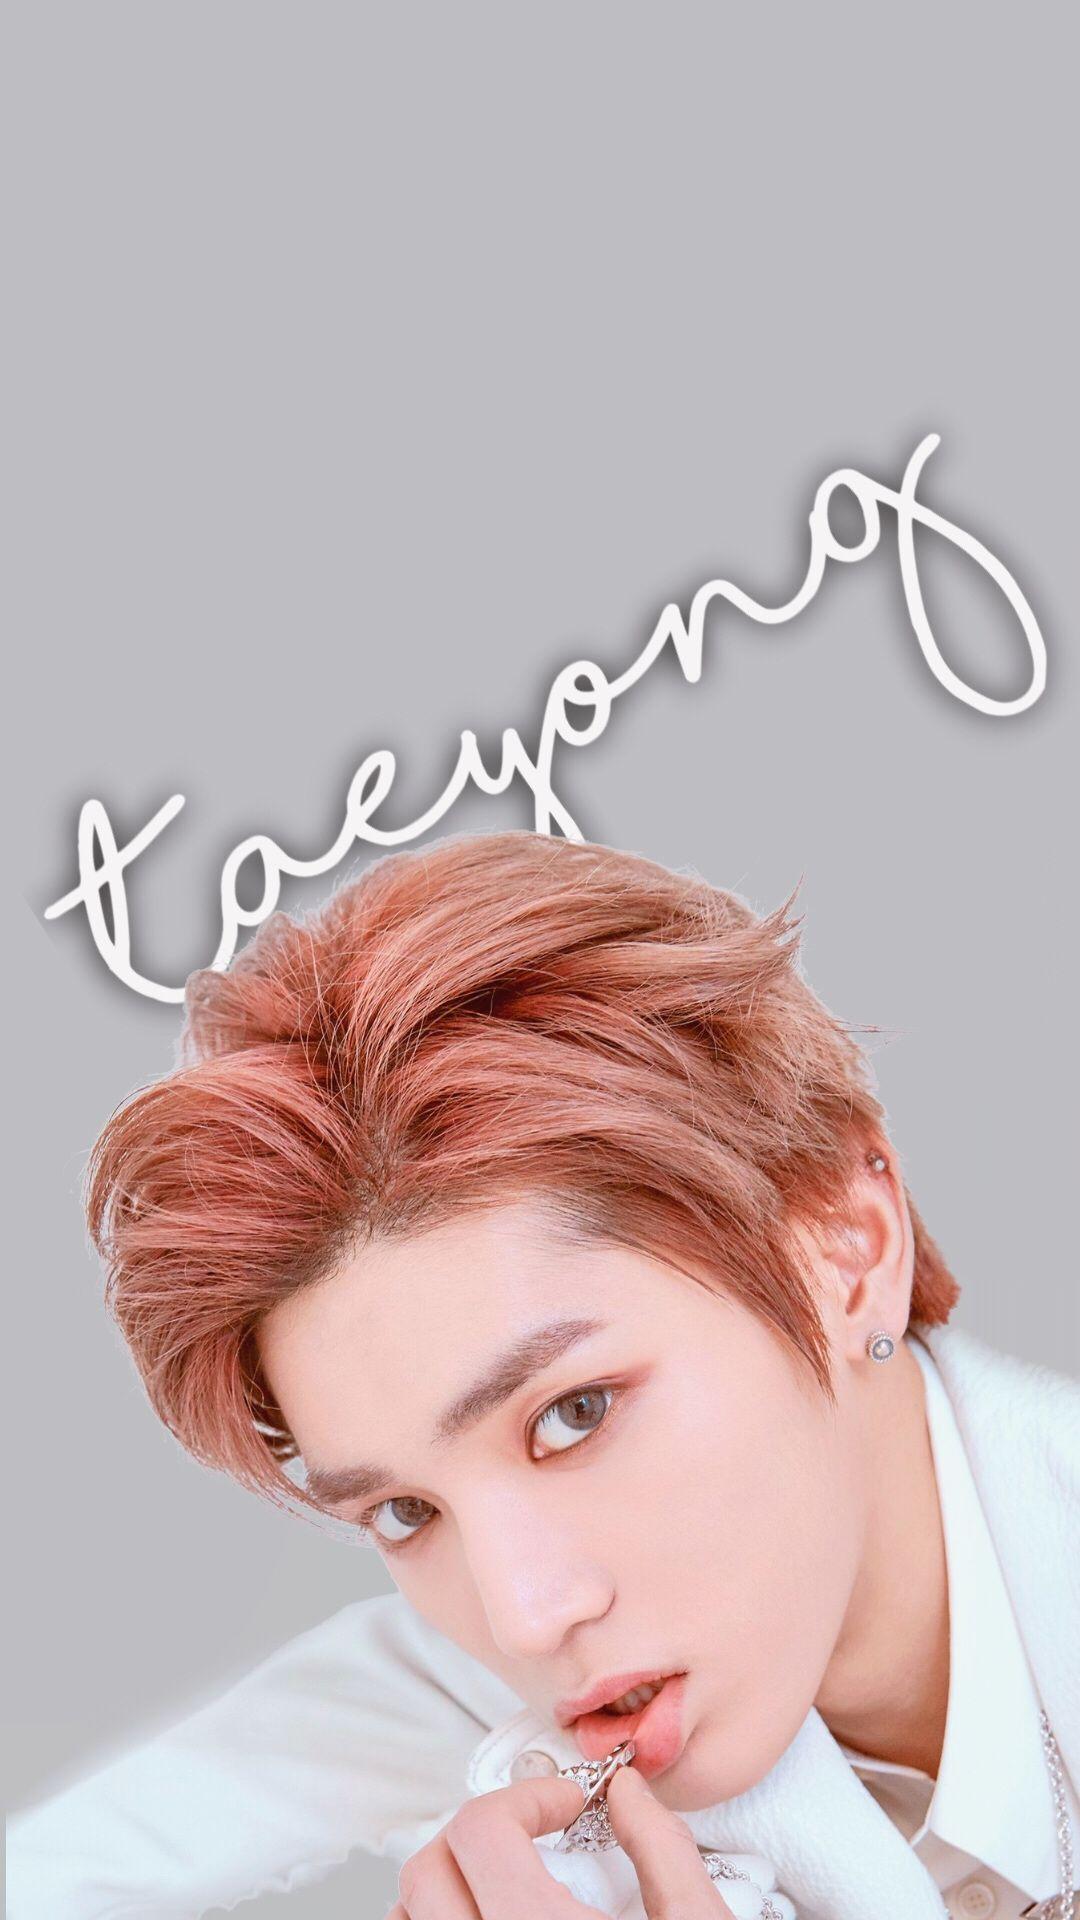 Touch NCT Wallpaper Free Touch NCT Background